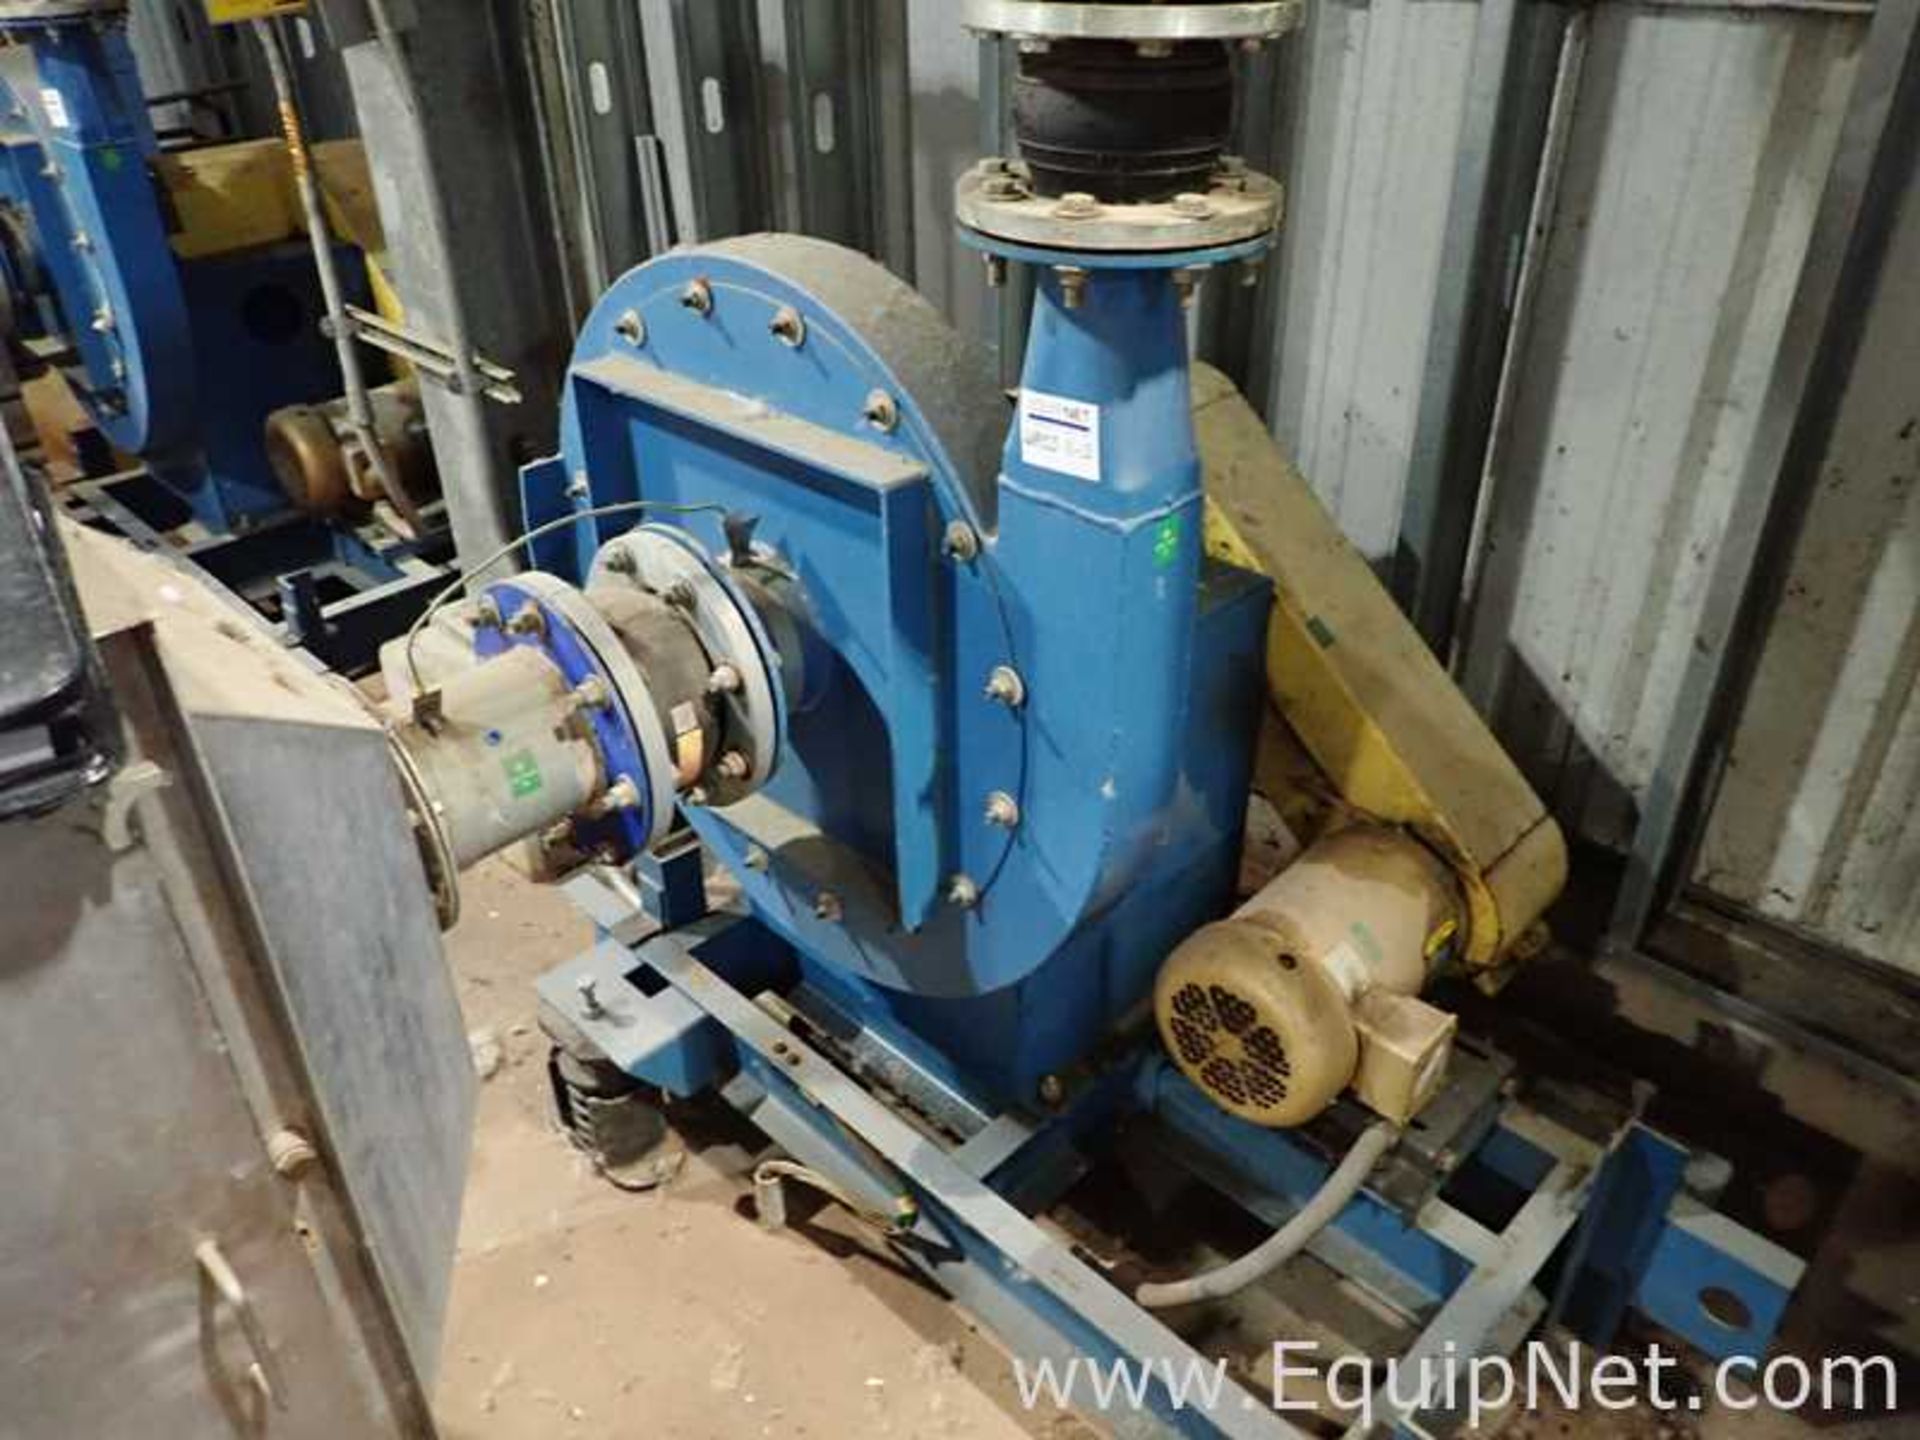 Donaldson Torit DFT 2-4 Dust Collector System - Image 8 of 10